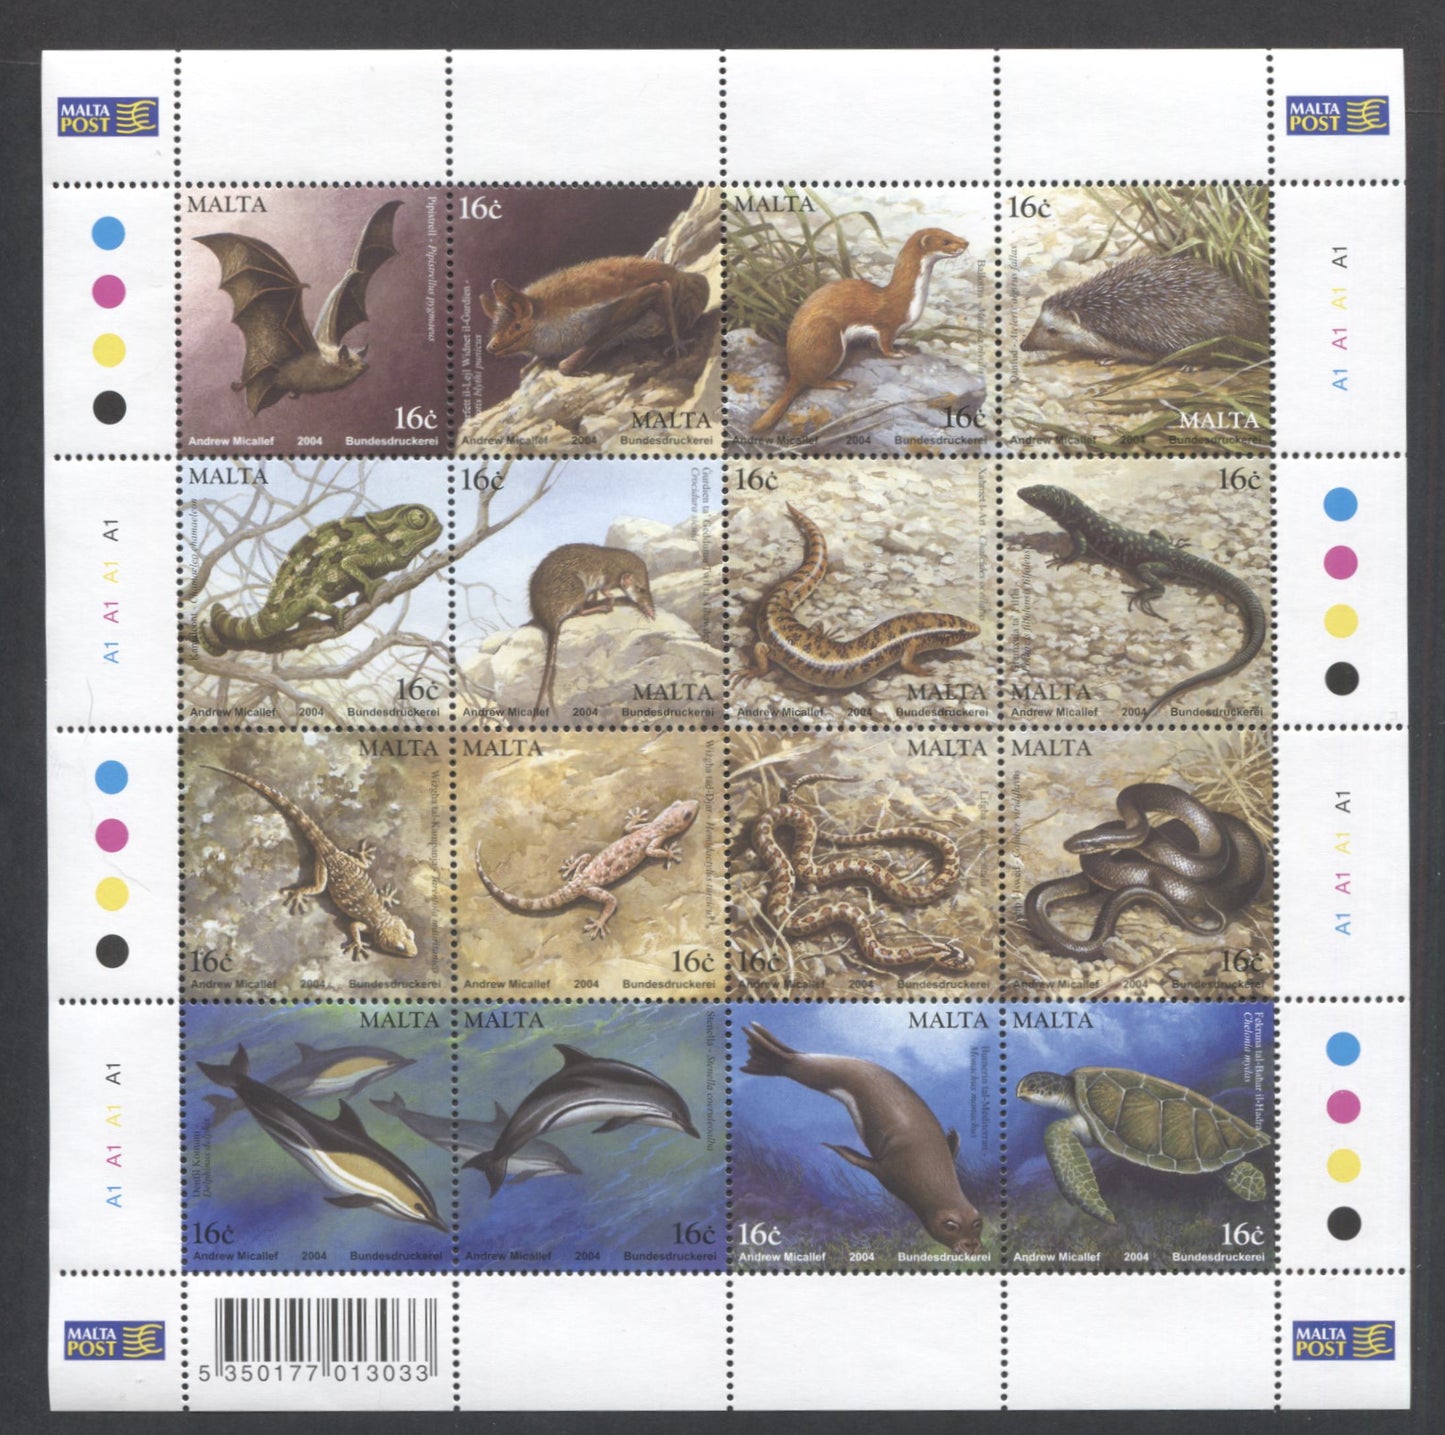 Lot 68 Malta SC#1159 16c Multicolored 2004 Fauna Issue, A VFNH Souvenri Sheet Of 16, Click on Listing to See ALL Pictures, 2017 Scott Cat. $15